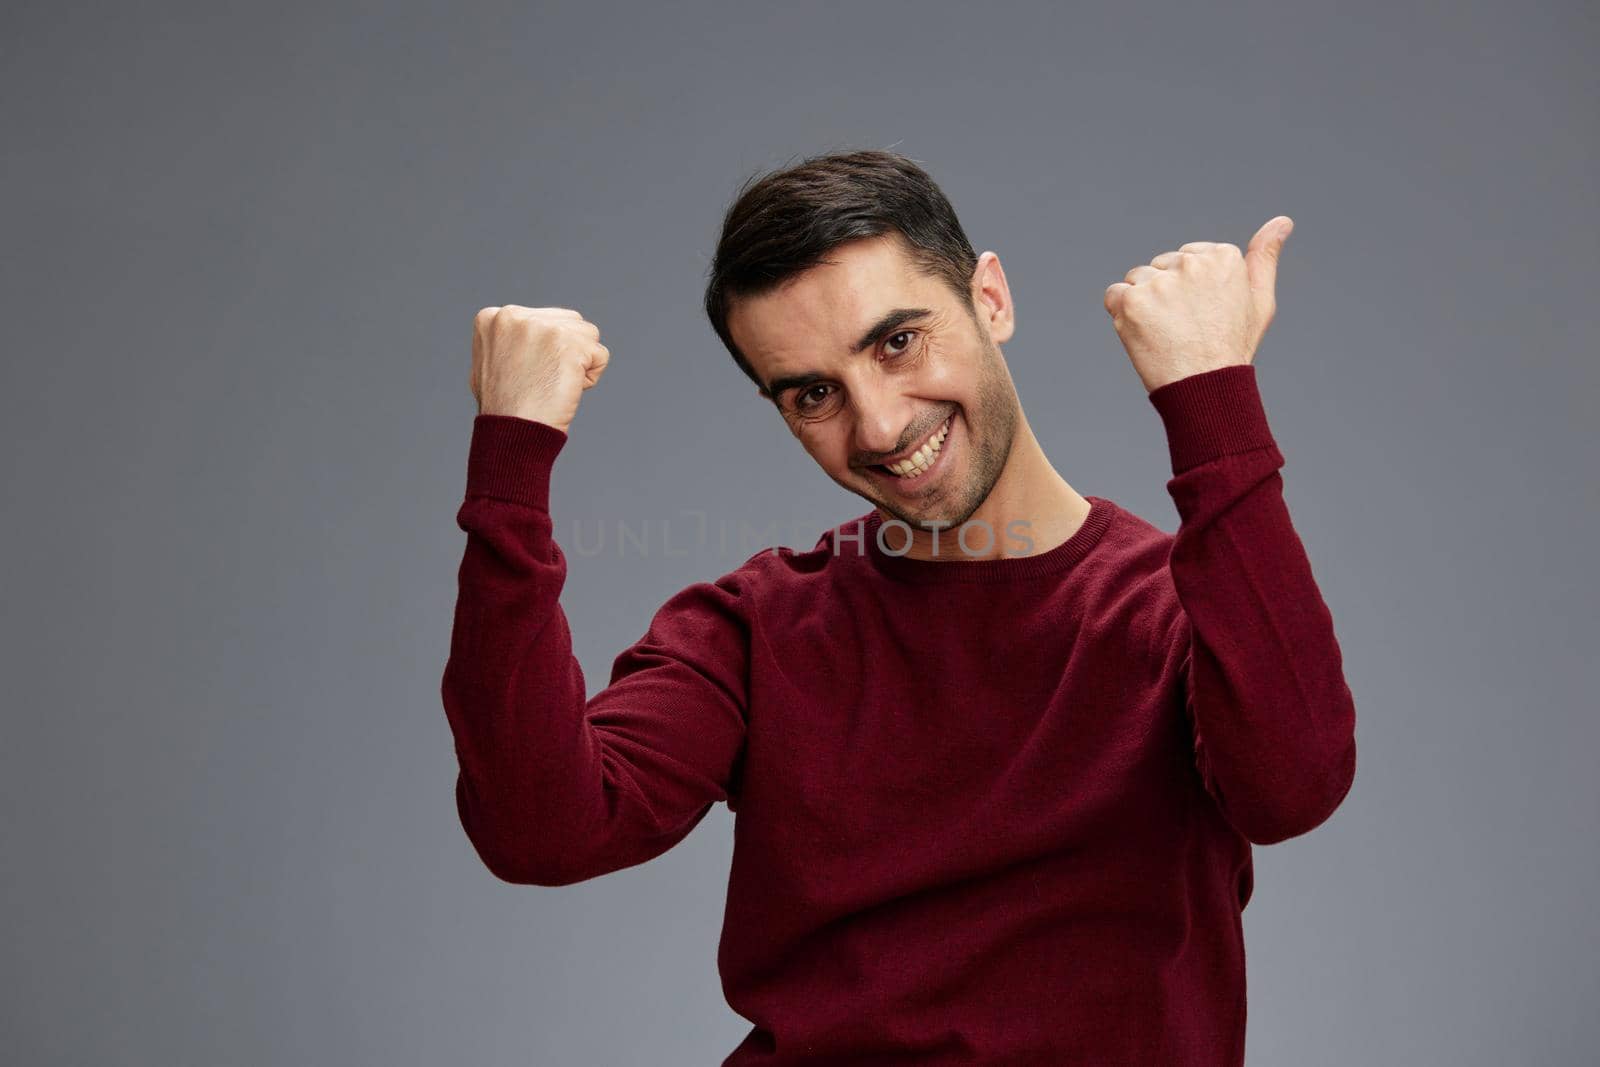 portrait man pointing fingers to the side in a sweater posing hand gesture emotions Gray background by SHOTPRIME